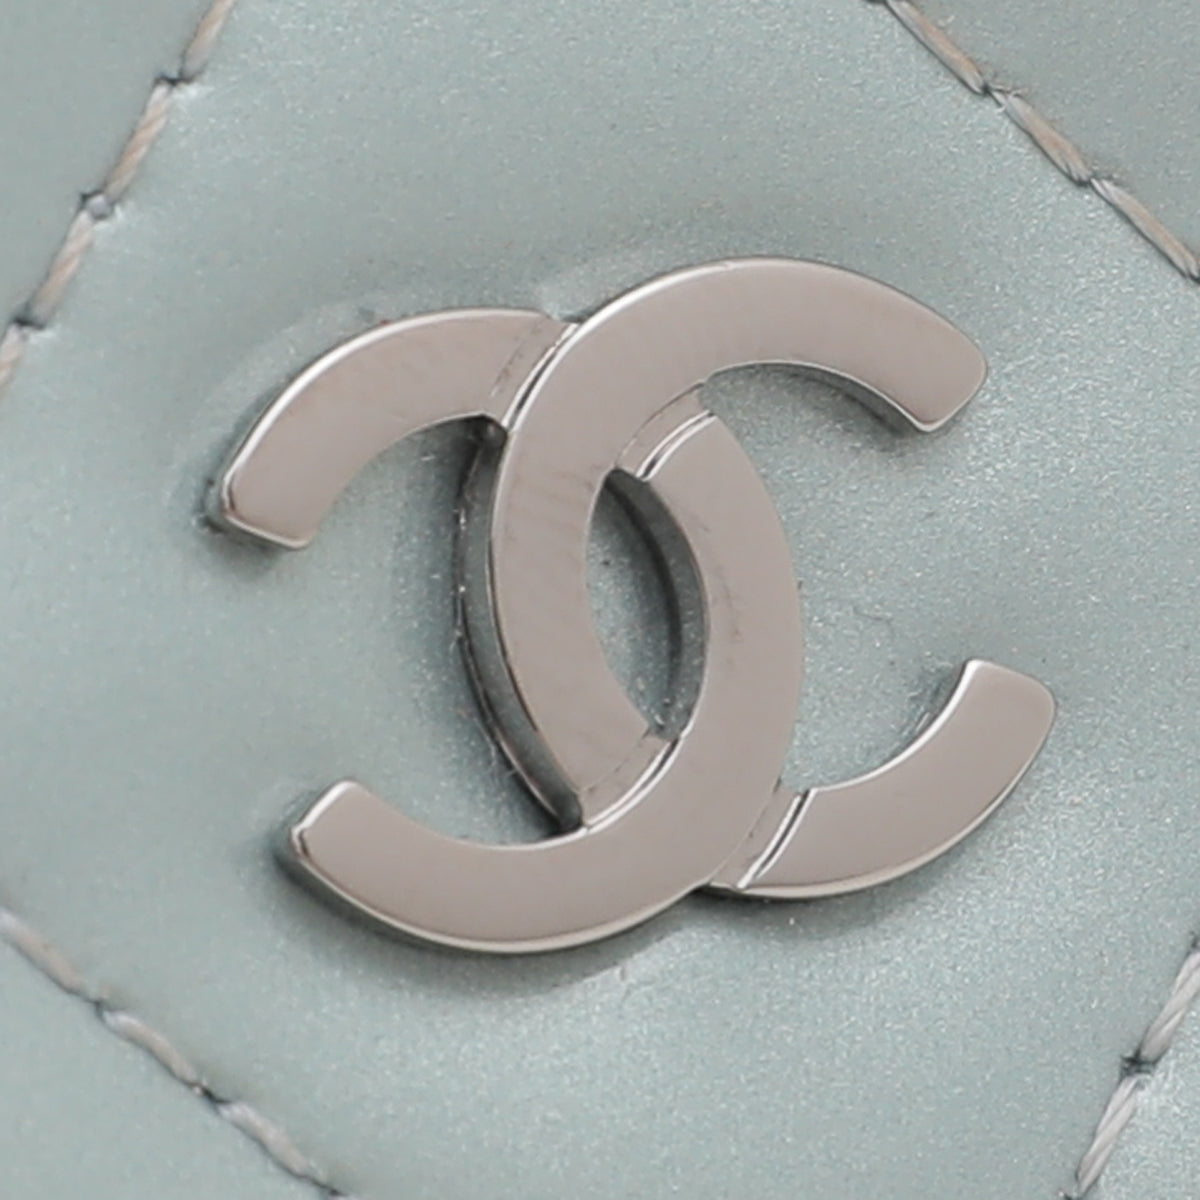 Chanel Powder Blue Classic Wallet On Chain